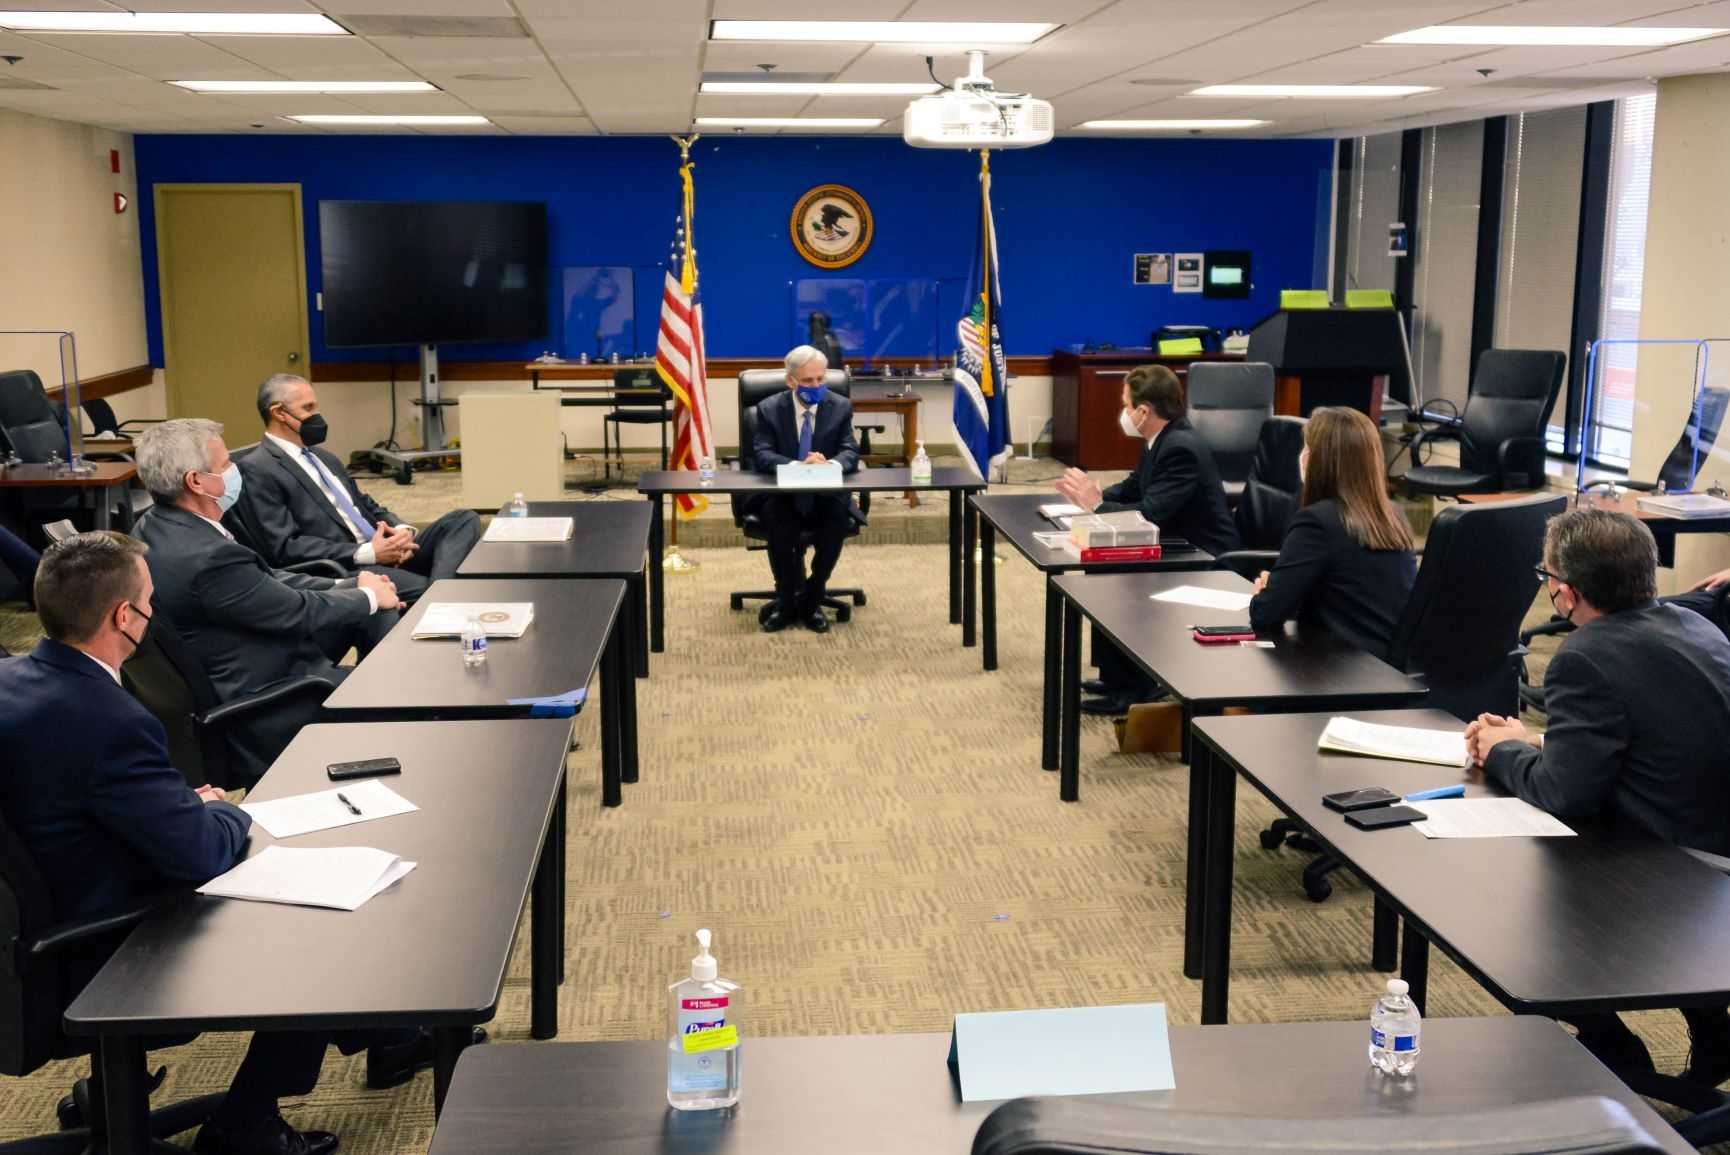 Attorney General Garland visited the United States Attorney’s Office for the District of Columbia for additional briefings on the January 6 insurrection and to thank everyone for their tireless work on this and countless other cases.